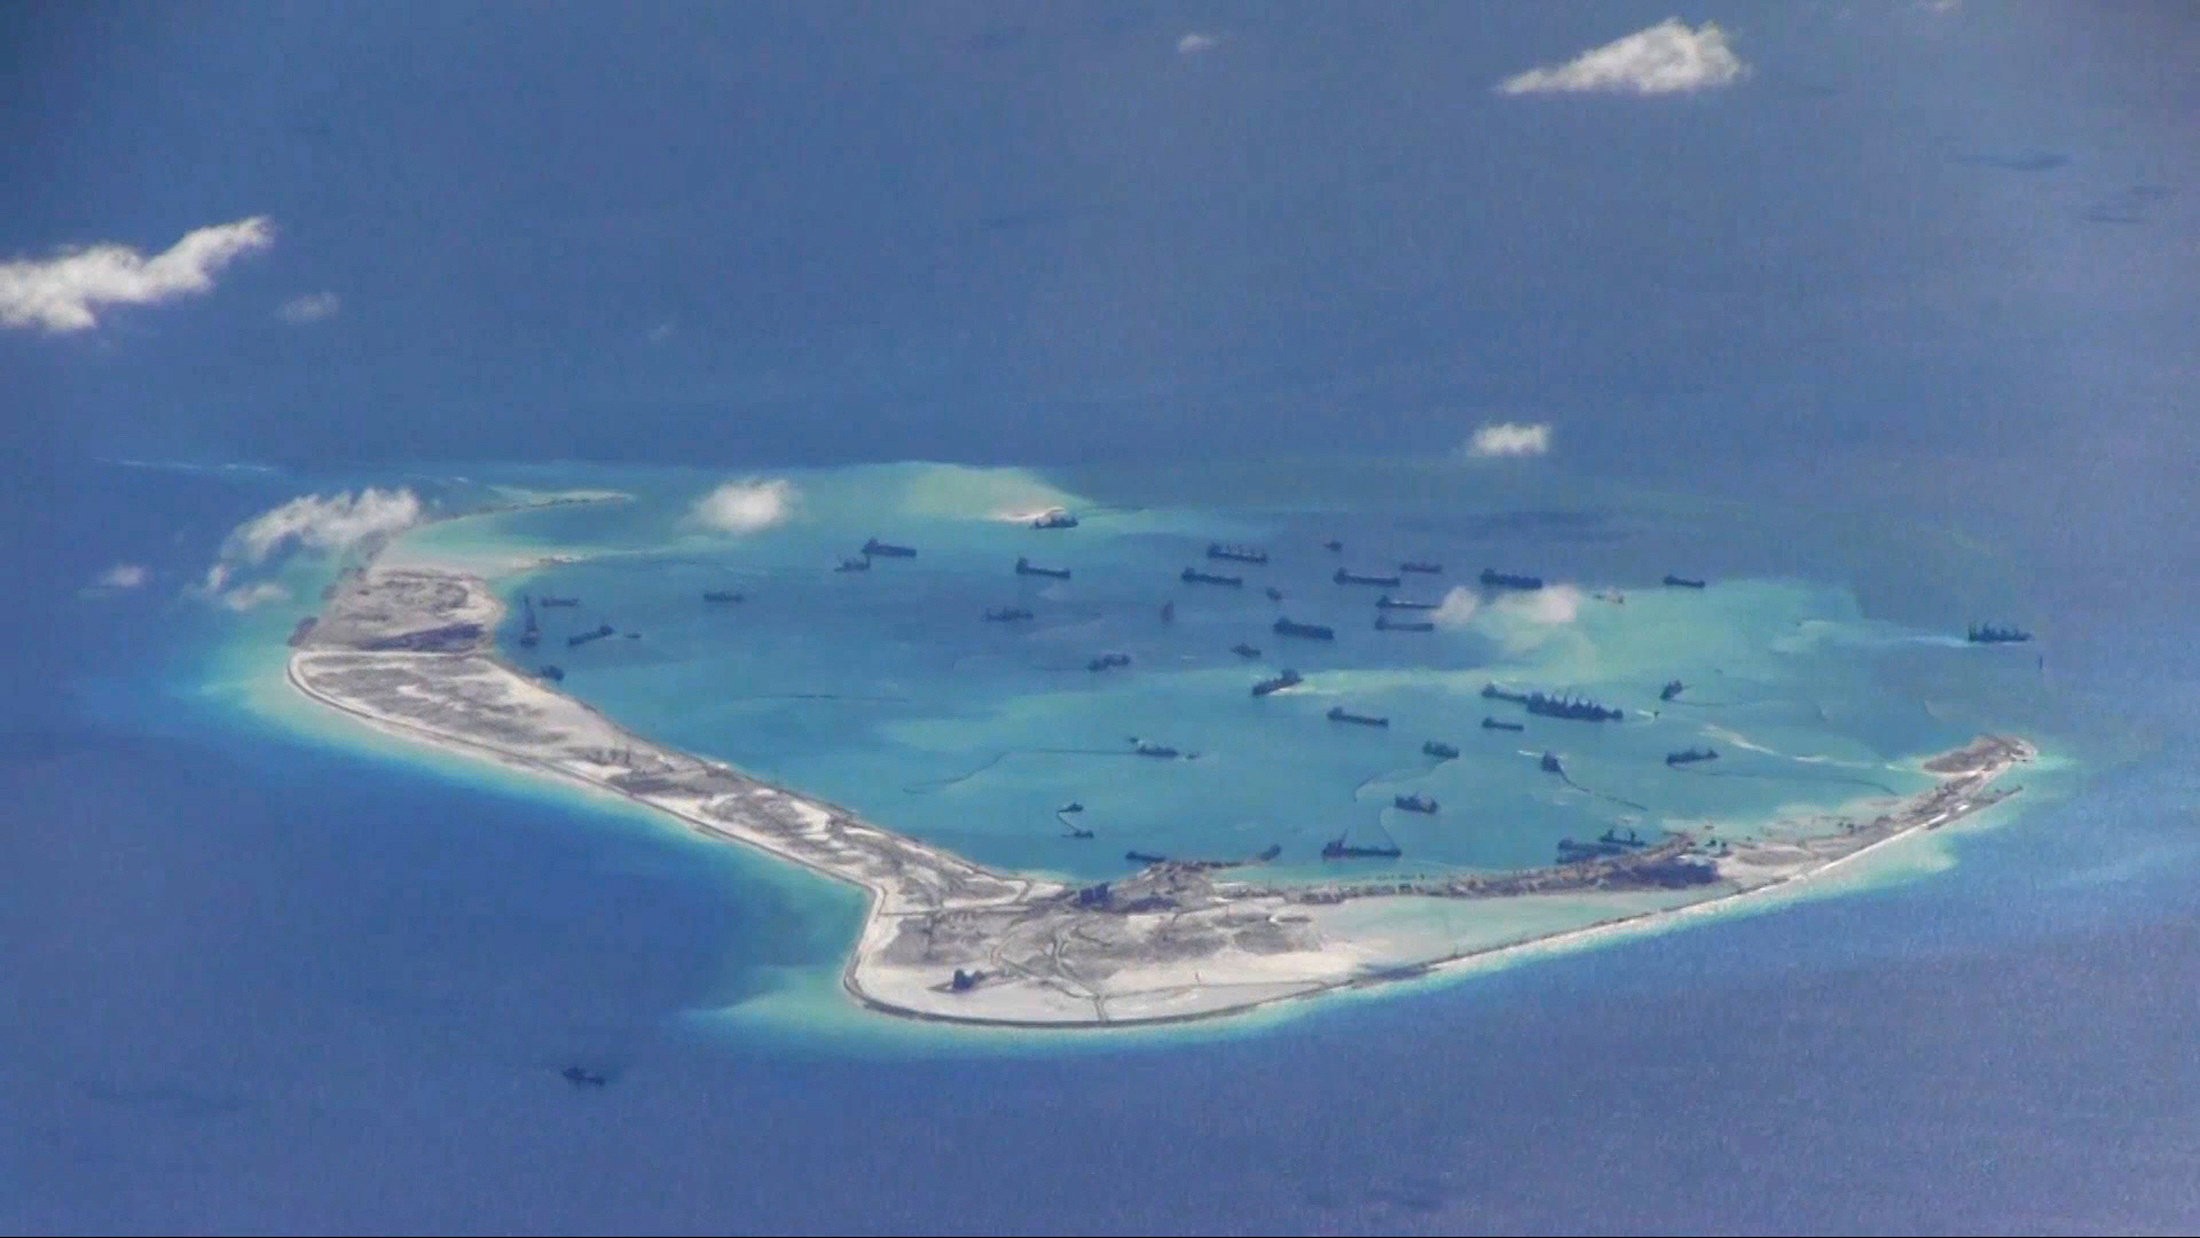 An aerial photo of Chinese dredging vessels purportedly seen in the waters around the disputed Spratly Islands in the South China Sea. Photo: Reuters